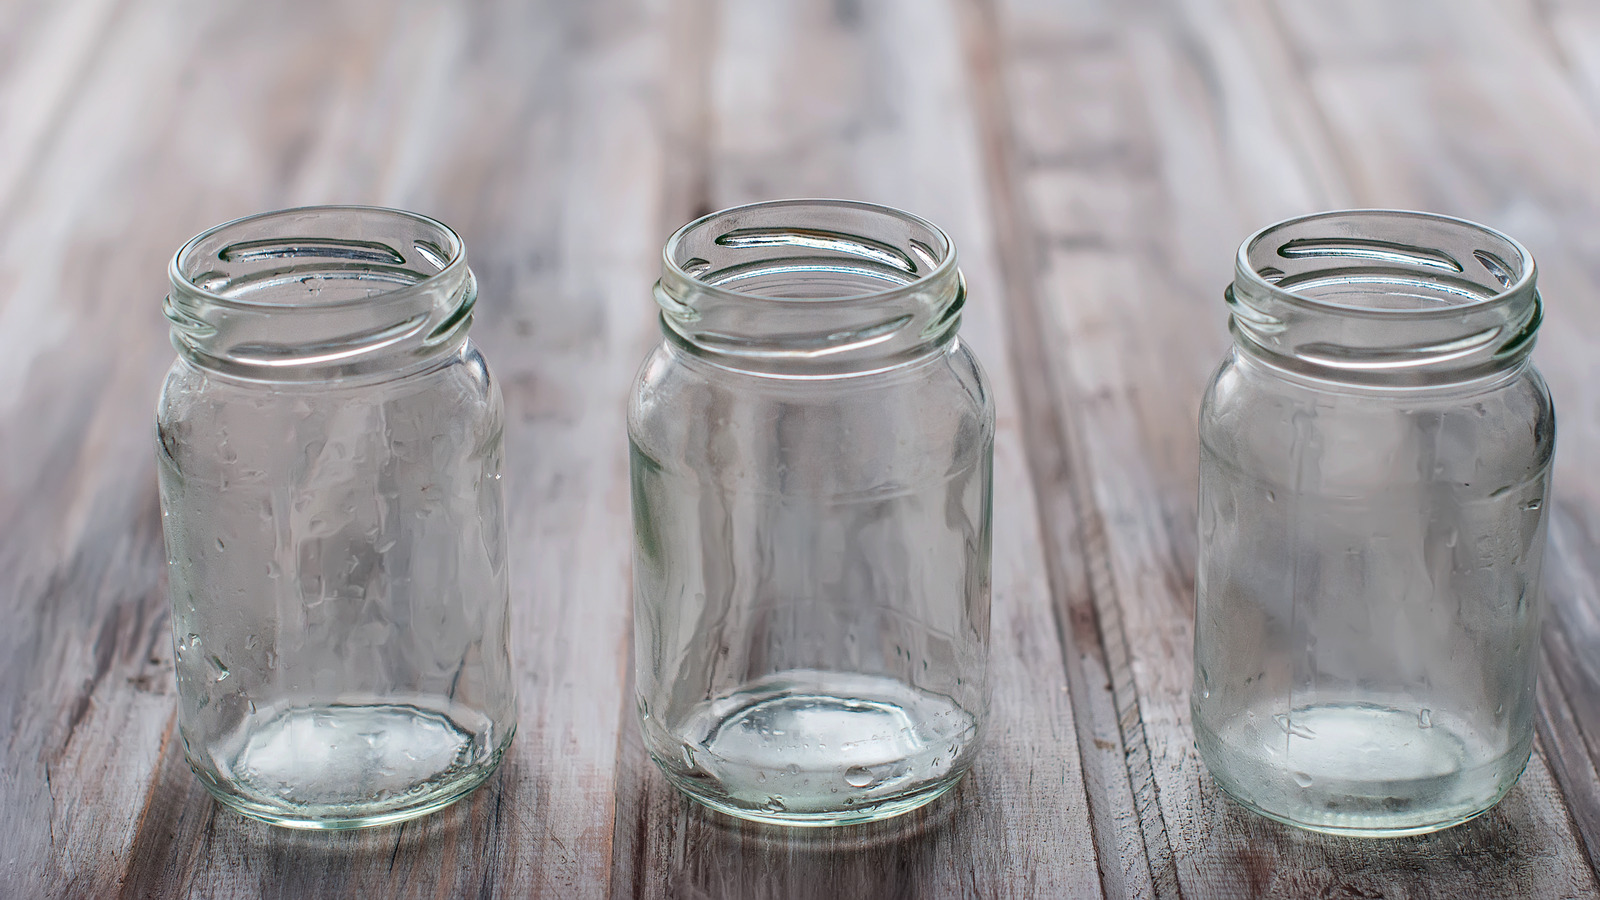 Breathe New Life Into An Old Mason Jar With This Chic Tissue Holder DIY